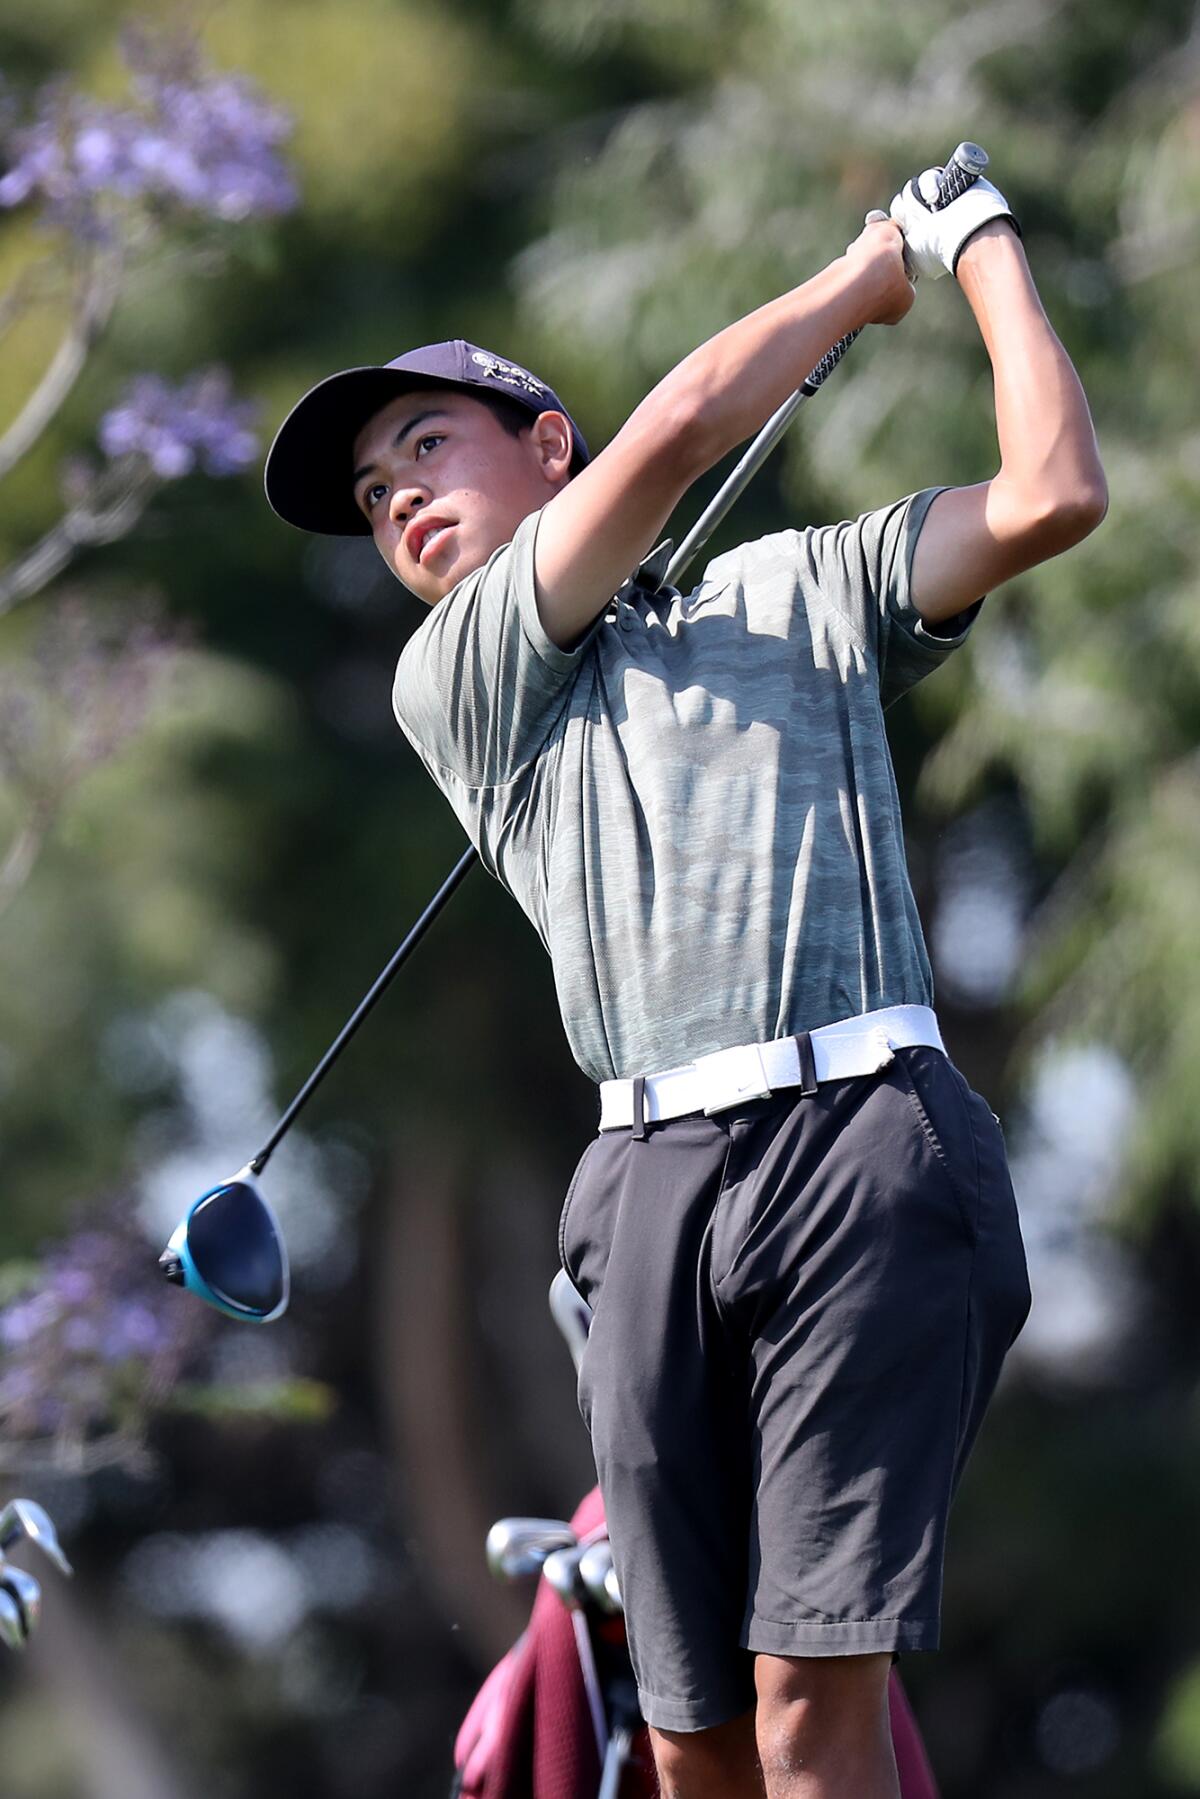 Costa Mesa's Cristopher Rodriguez tees off on Hole No. 4 against Estancia during the Battle for the Bell golf match.